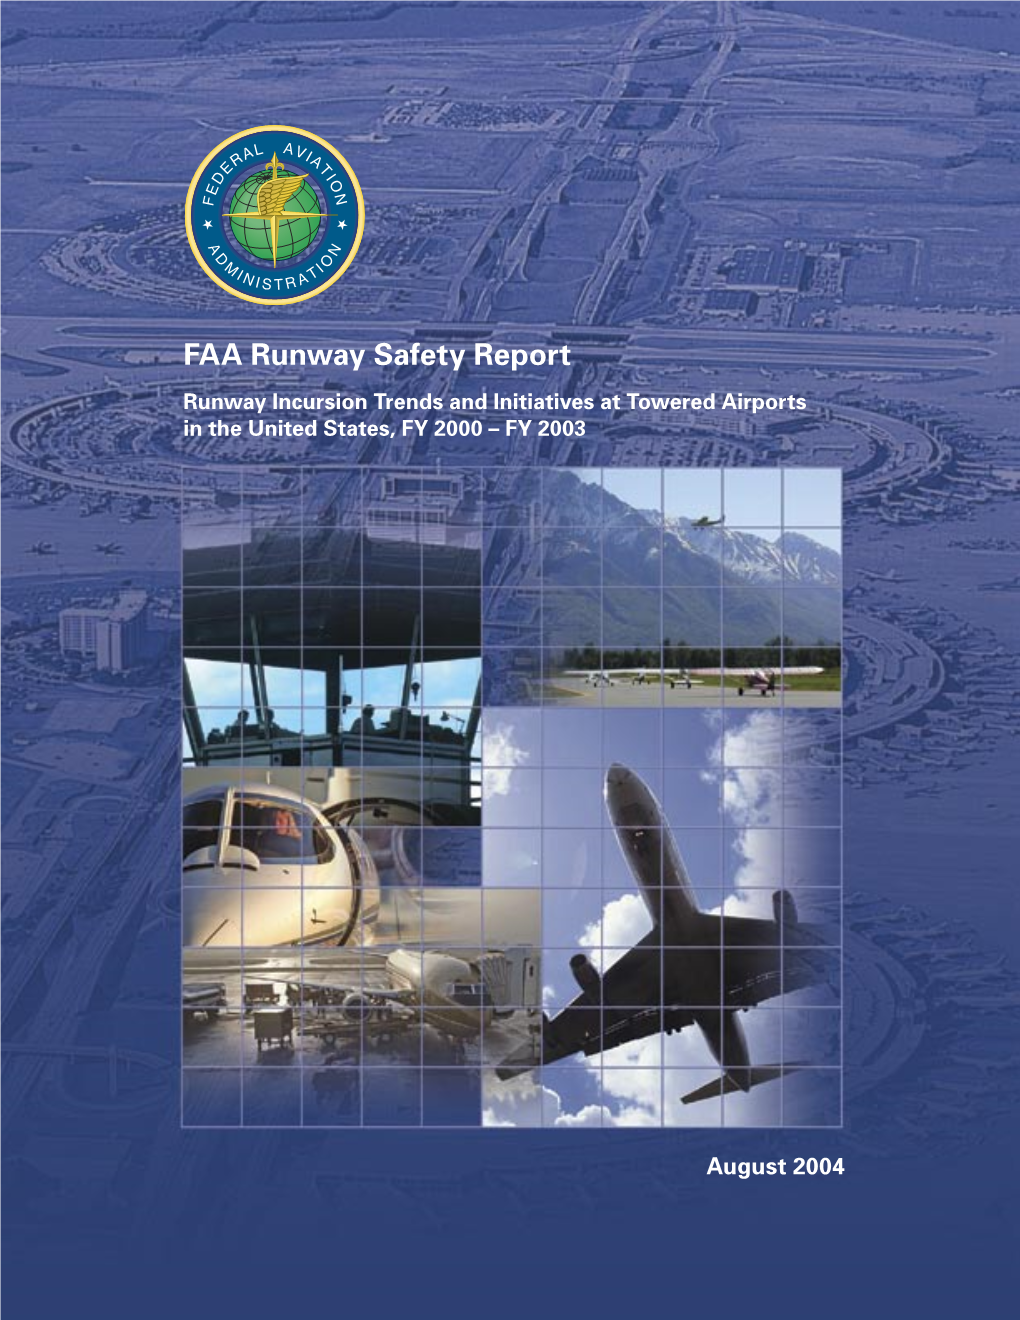 FAA Runway Safety Report FY 2000